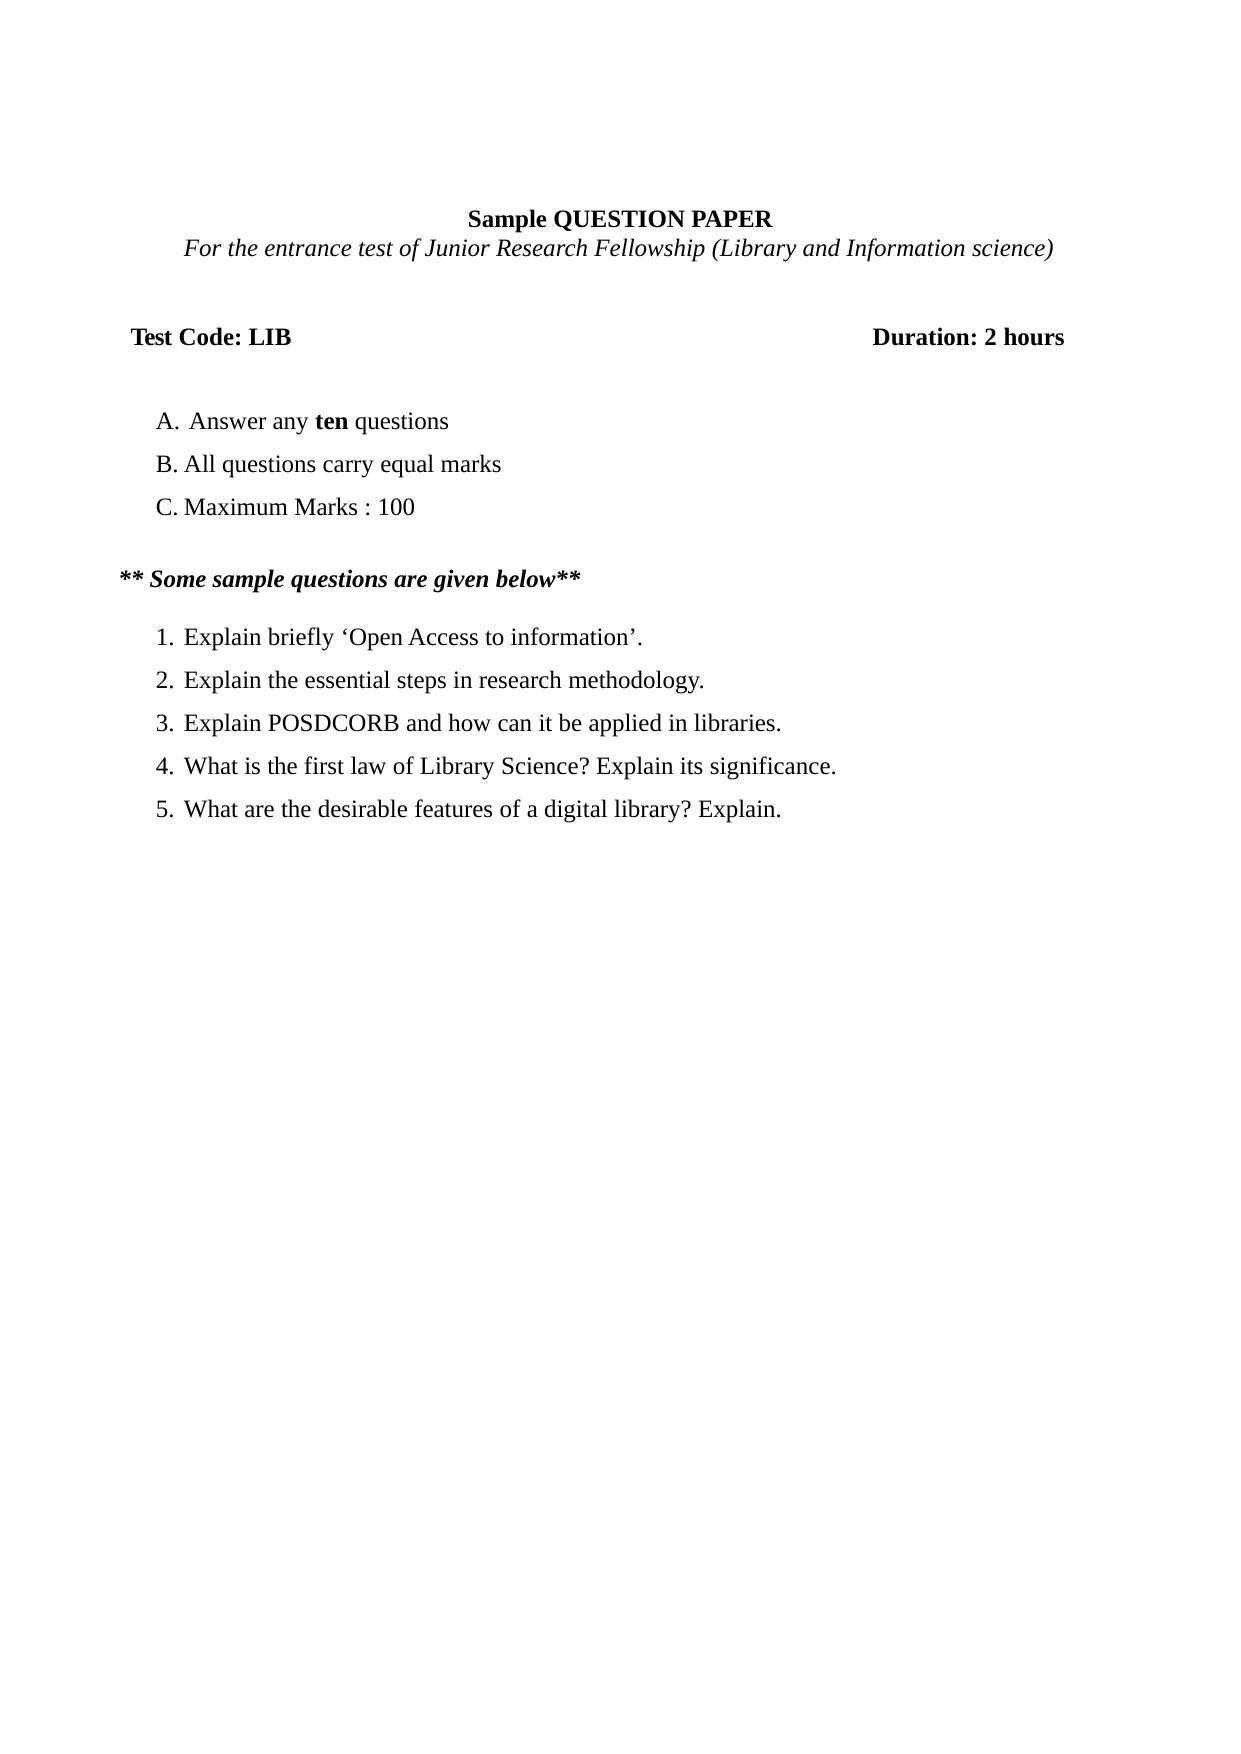 ISI Admission Test JRF in Library and Information Science LIB 2019 Sample Paper - Page 1